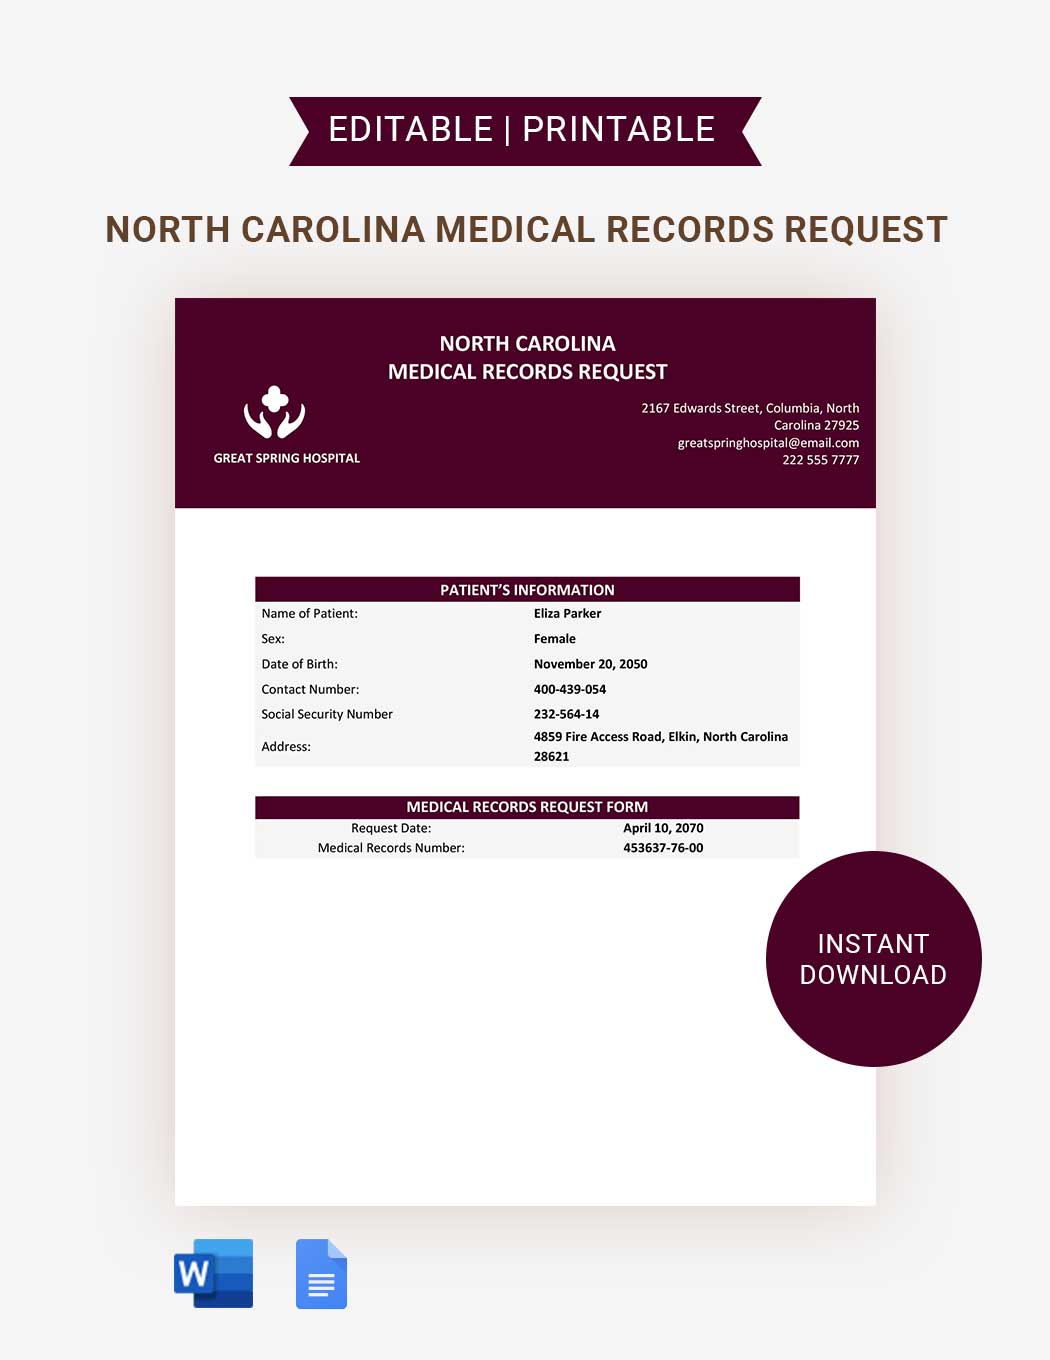 North Carolina Medical Records Request Template in Word, Google Docs